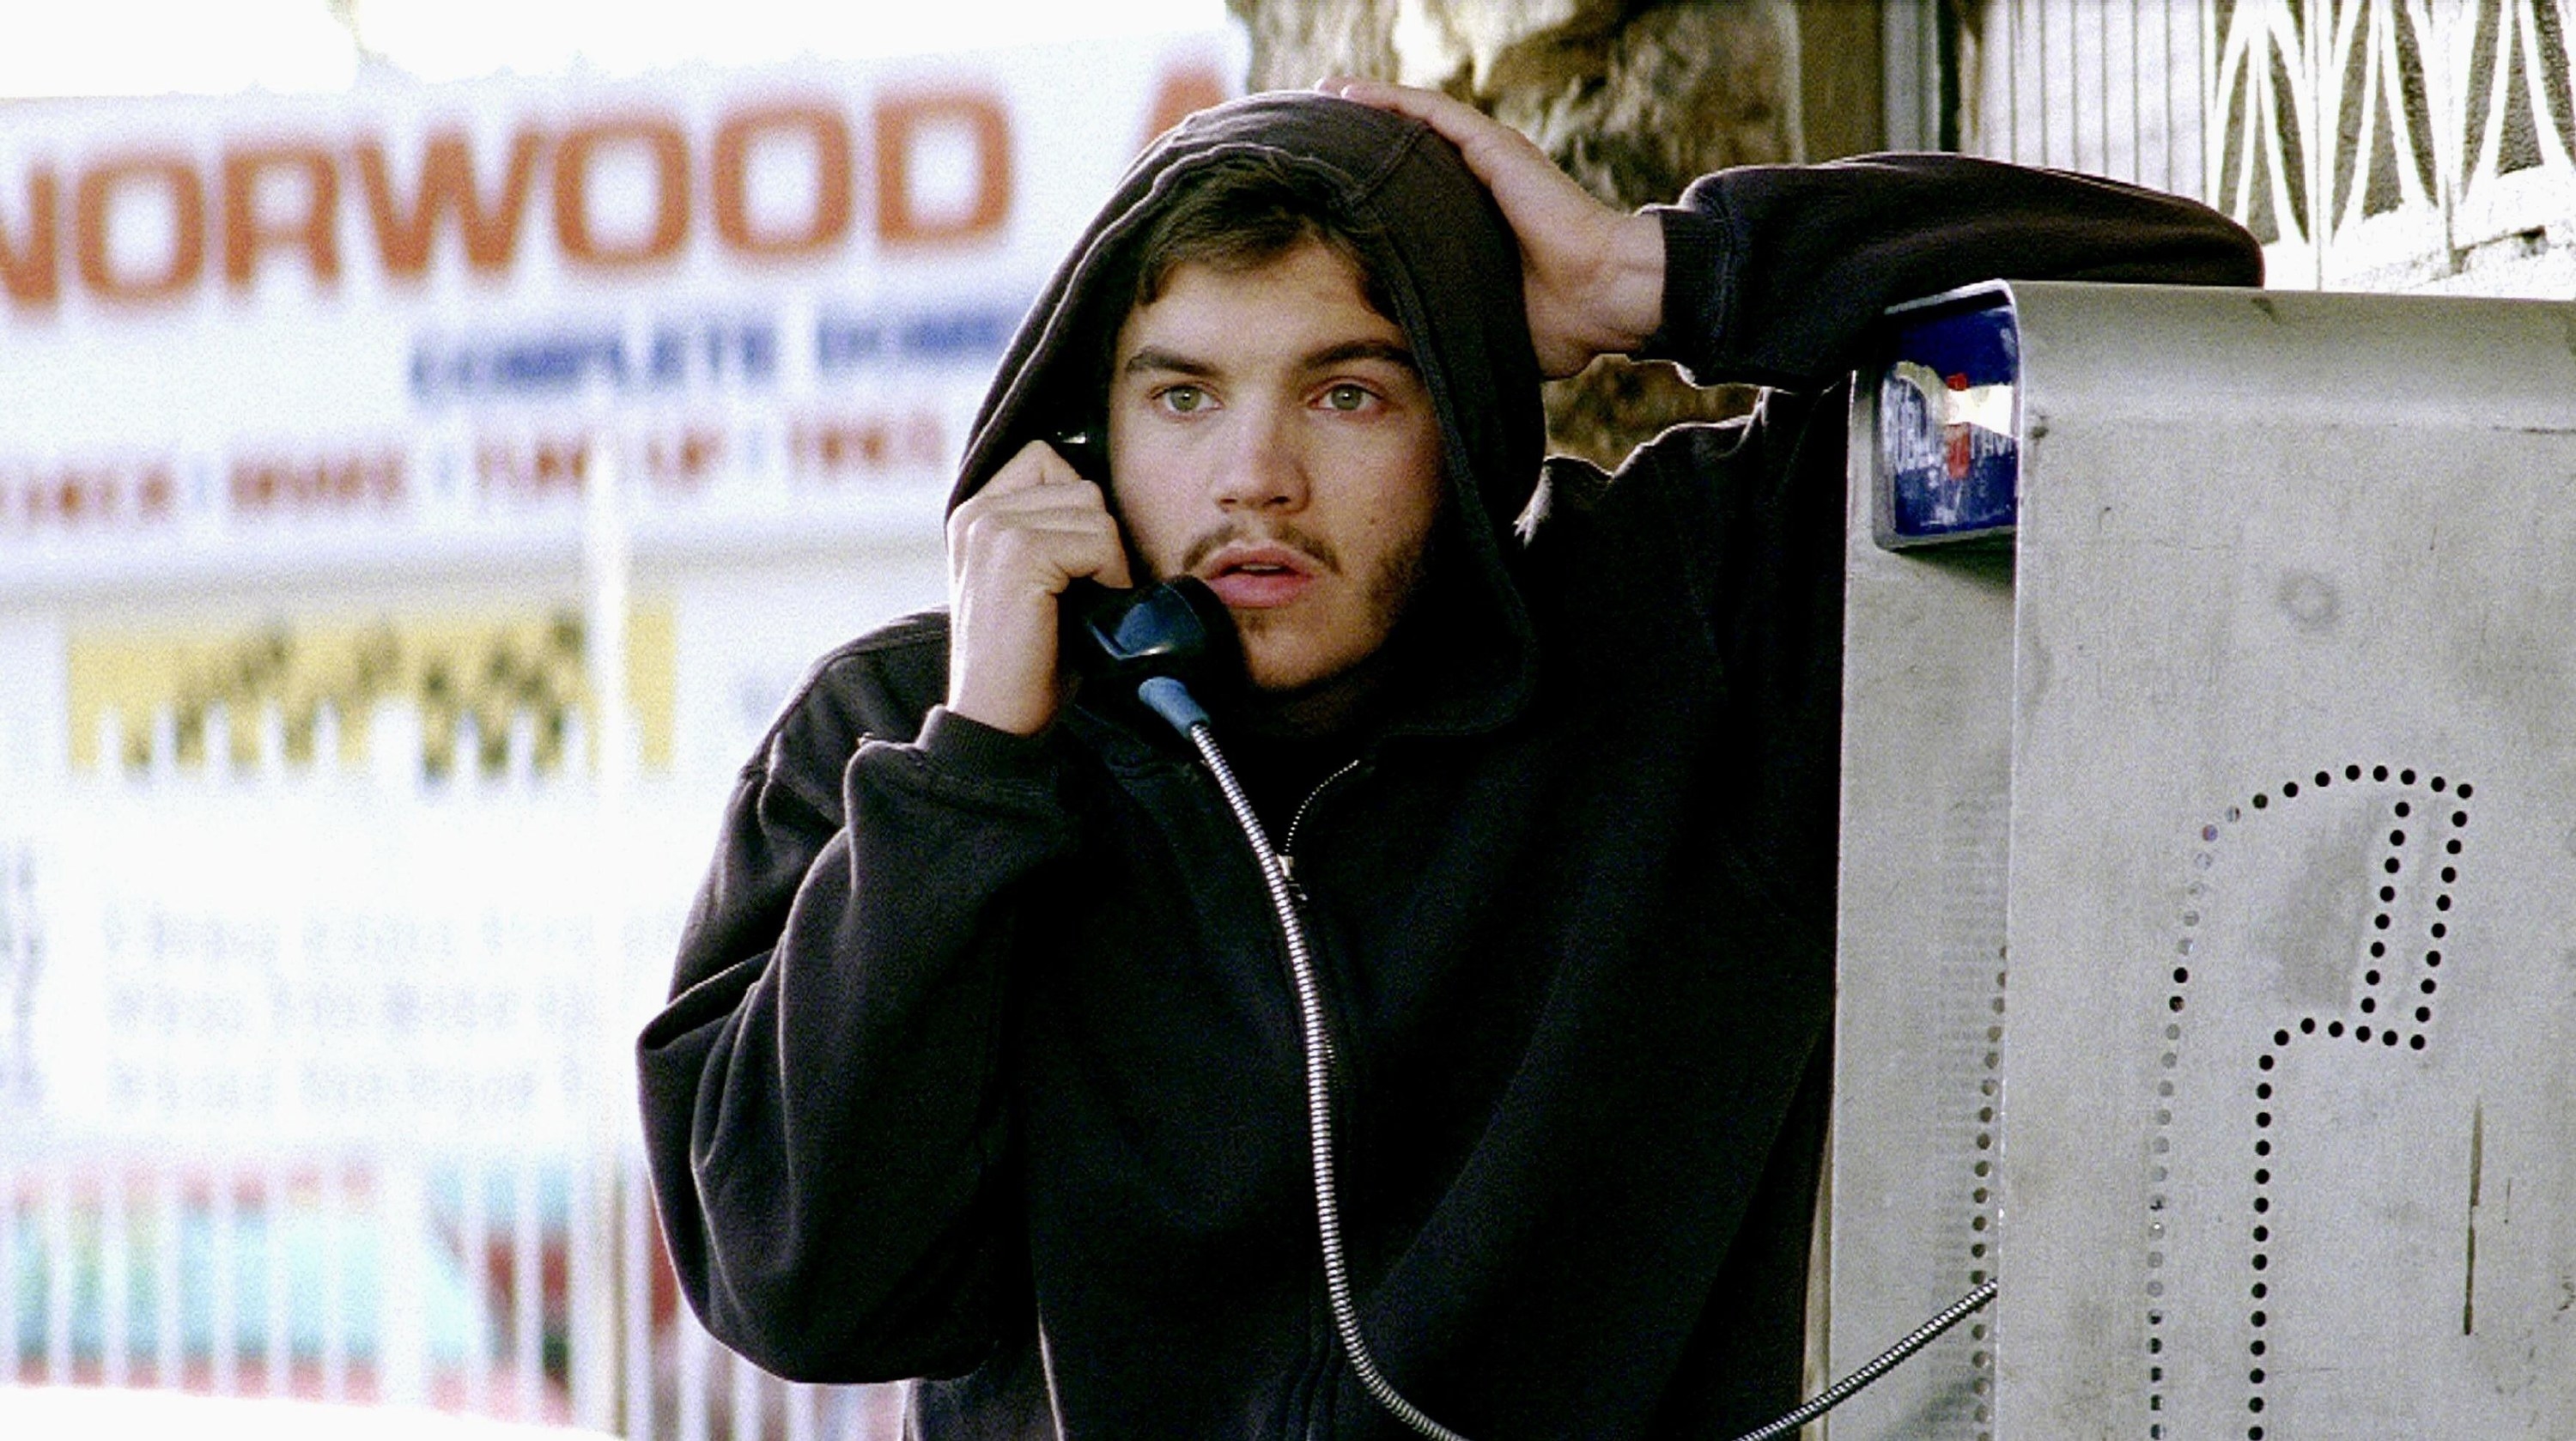 A young bearded man in a hoodie gets distressing news at a phone booth